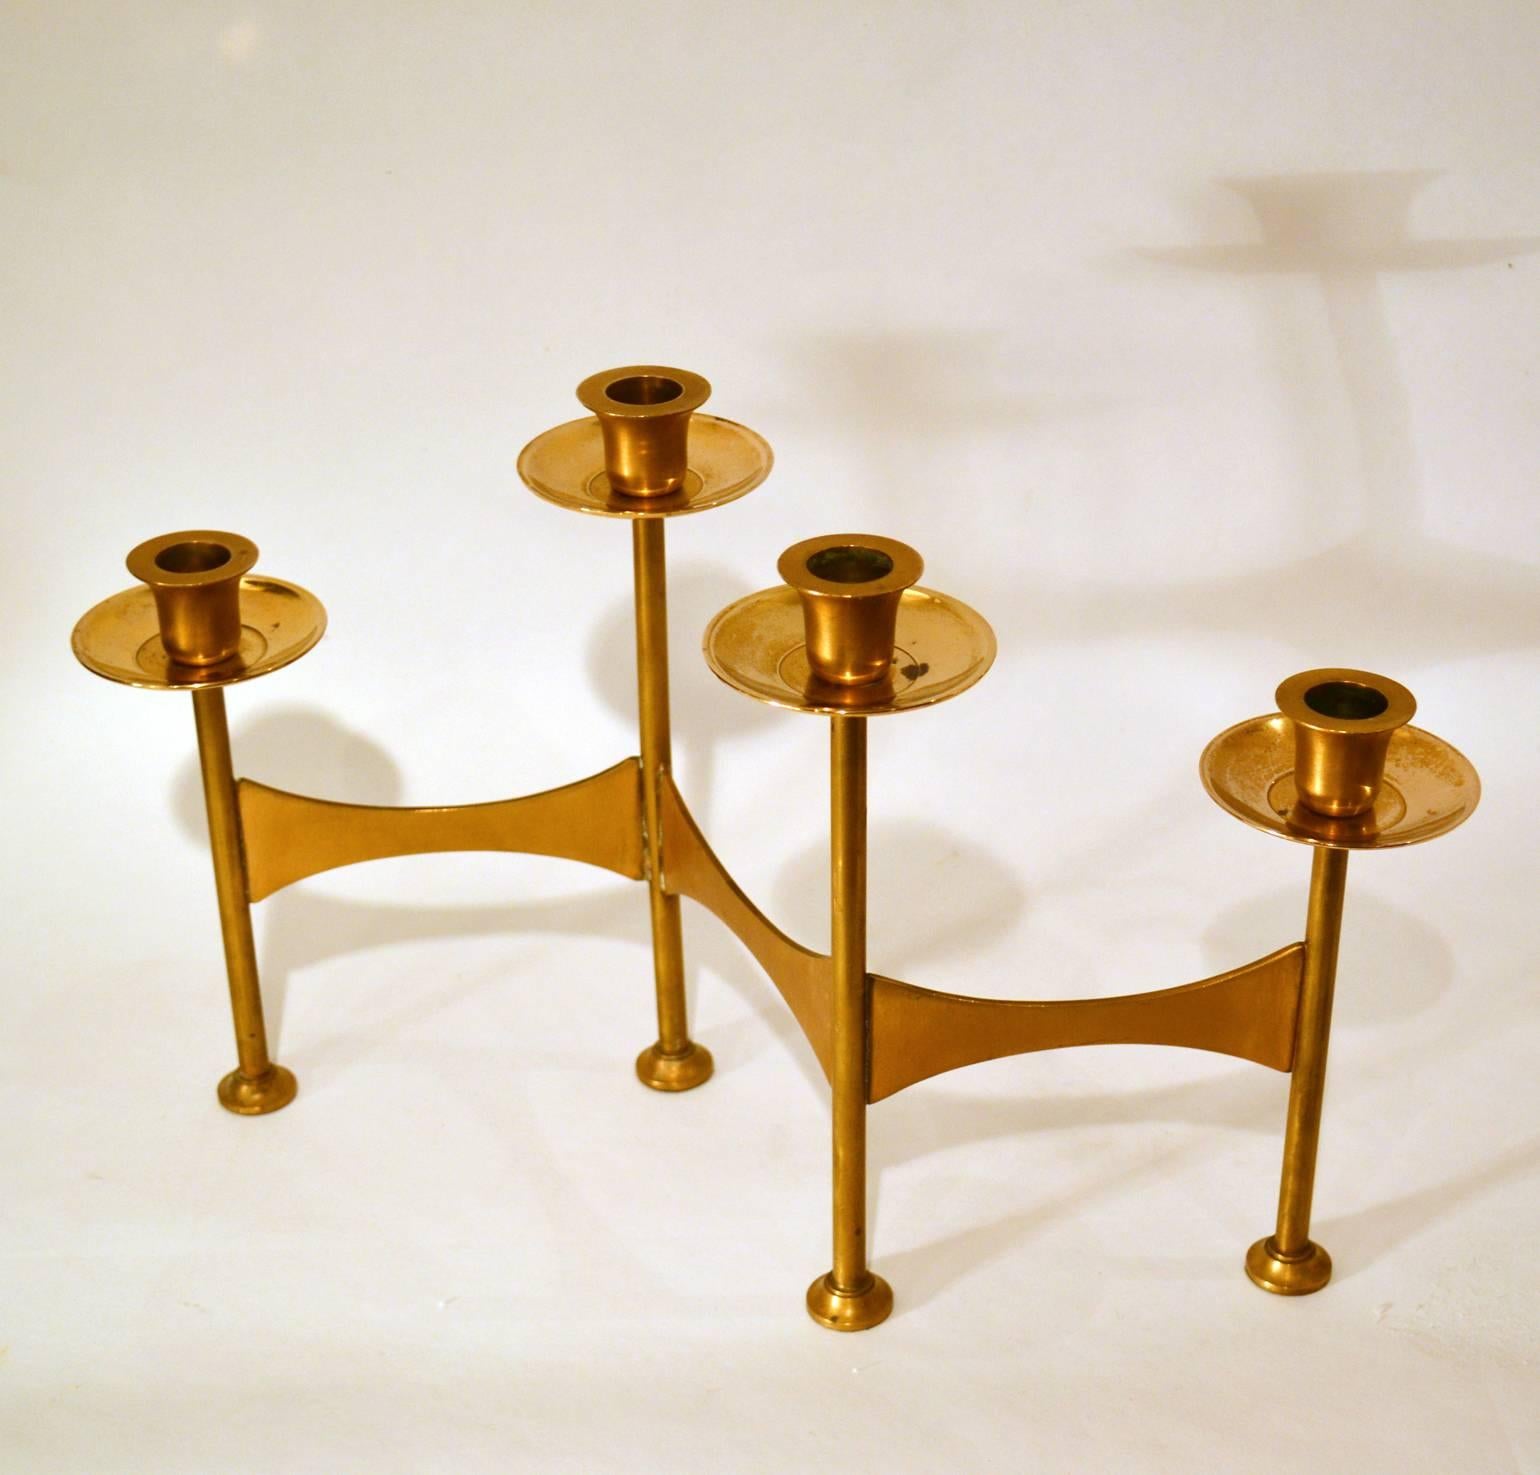 Danish candelabra for four candles on alternating heights is created in zigzag stationary positions, made in brass in the 1970s.